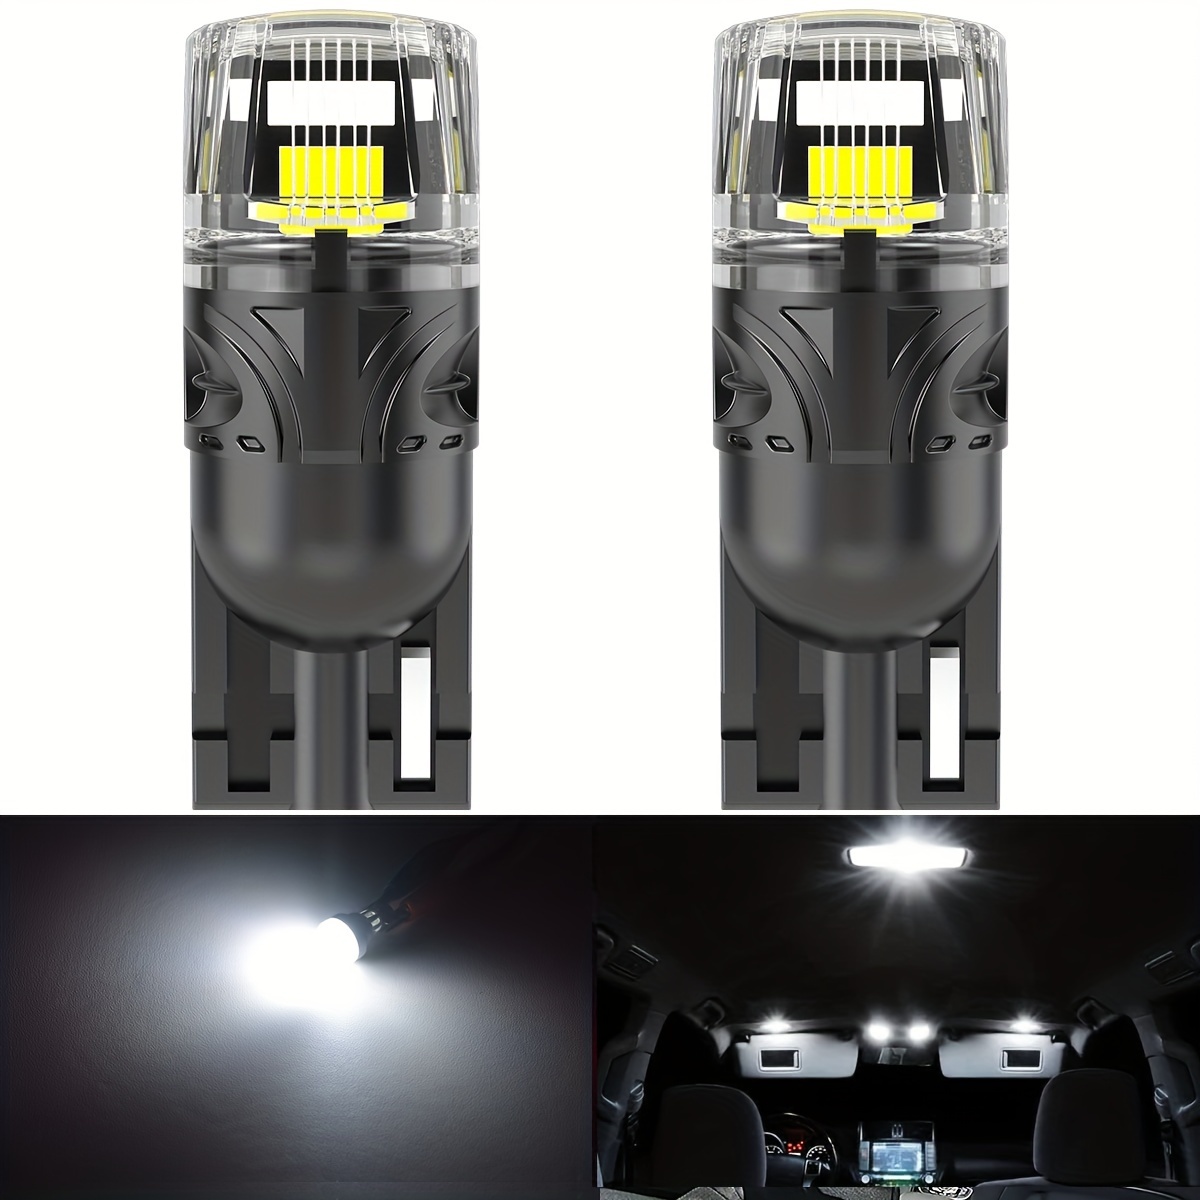 

2-piece W5w T10 White Led Bulbs - Error-free Canbus Compatible, 3x Brighter Car Marker & Interior Lights, Easy Install